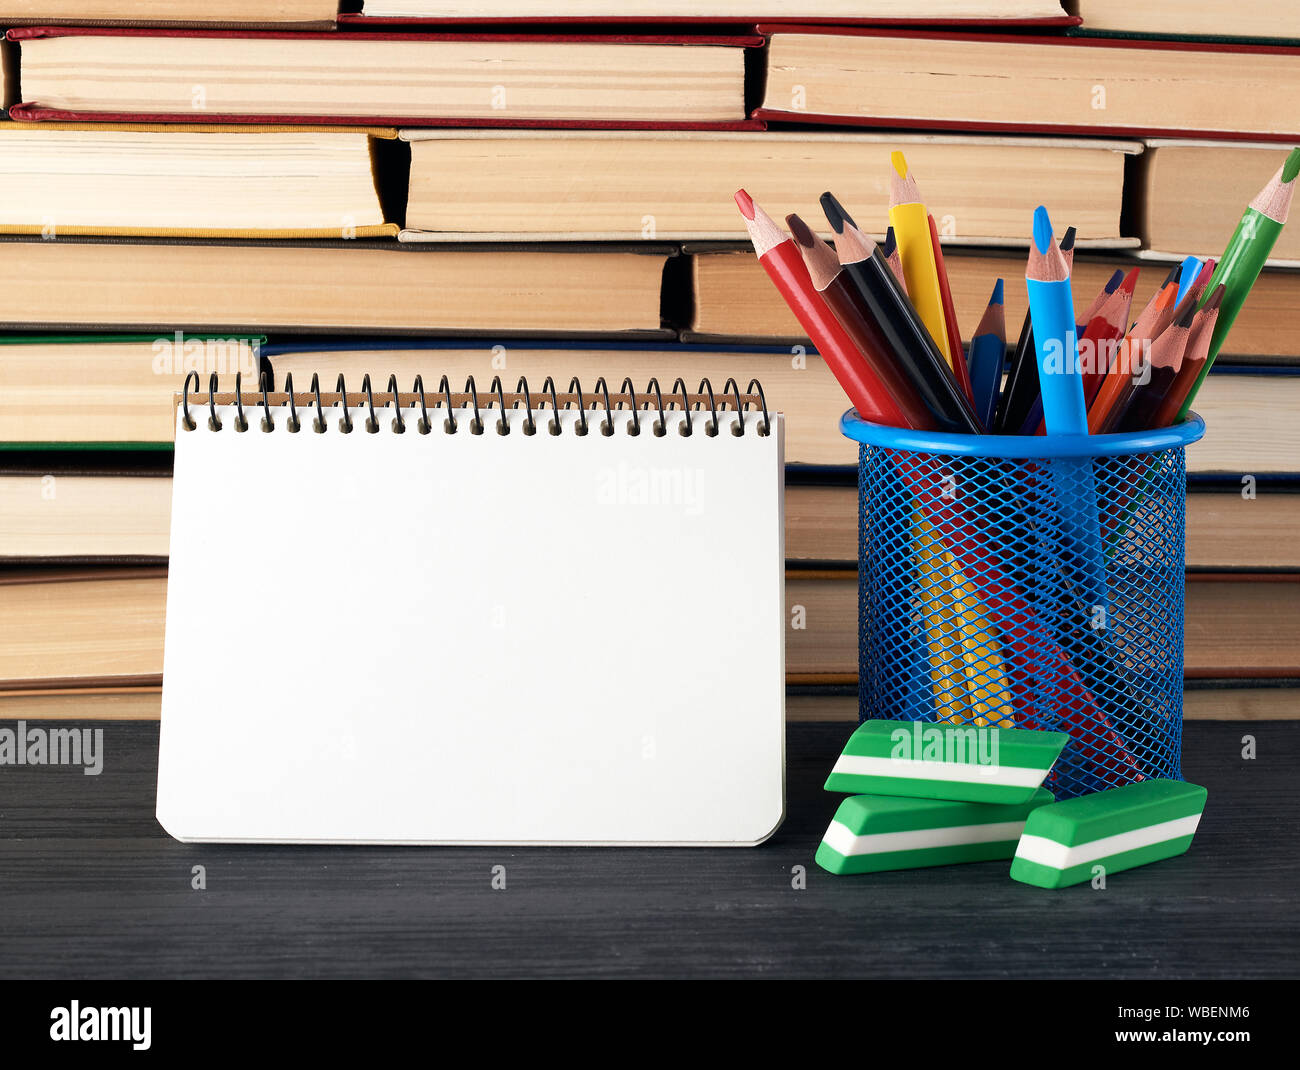 https://c8.alamy.com/comp/WBENM6/stacks-of-various-hardback-books-and-blue-stationery-glass-with-multi-colored-wooden-pencils-open-spiral-notebook-back-to-school-concept-WBENM6.jpg